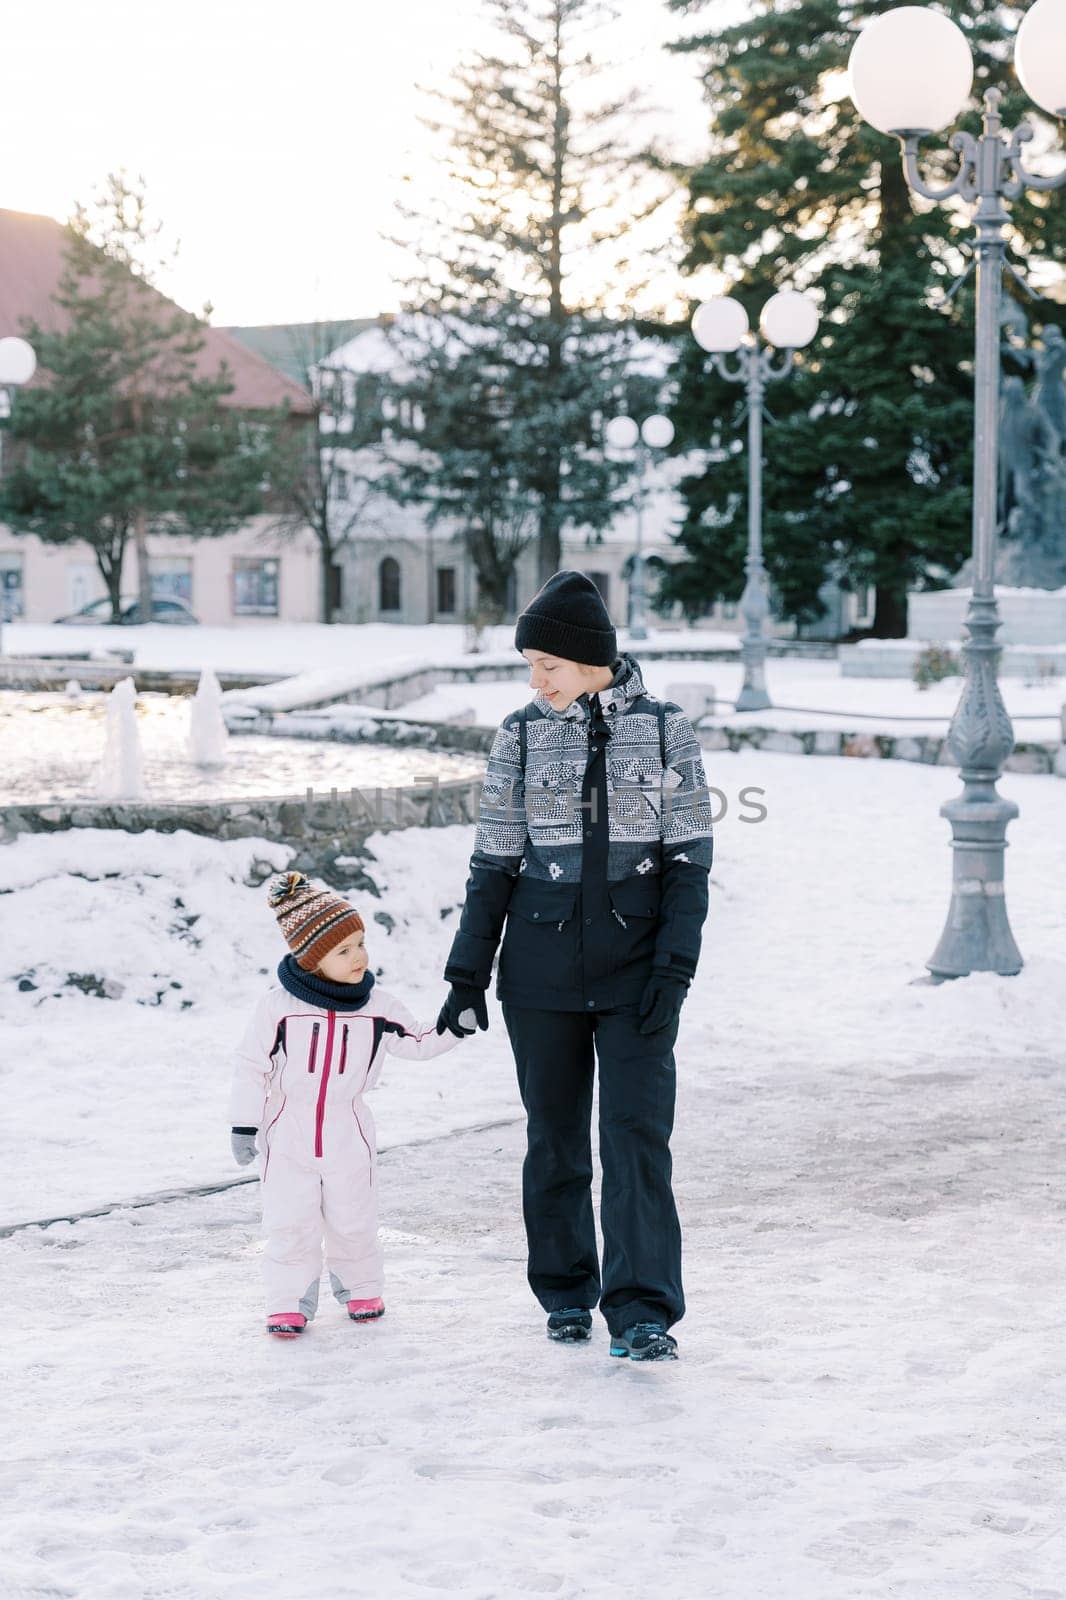 Mom and little girl walk holding hands along a snowy alley. High quality photo